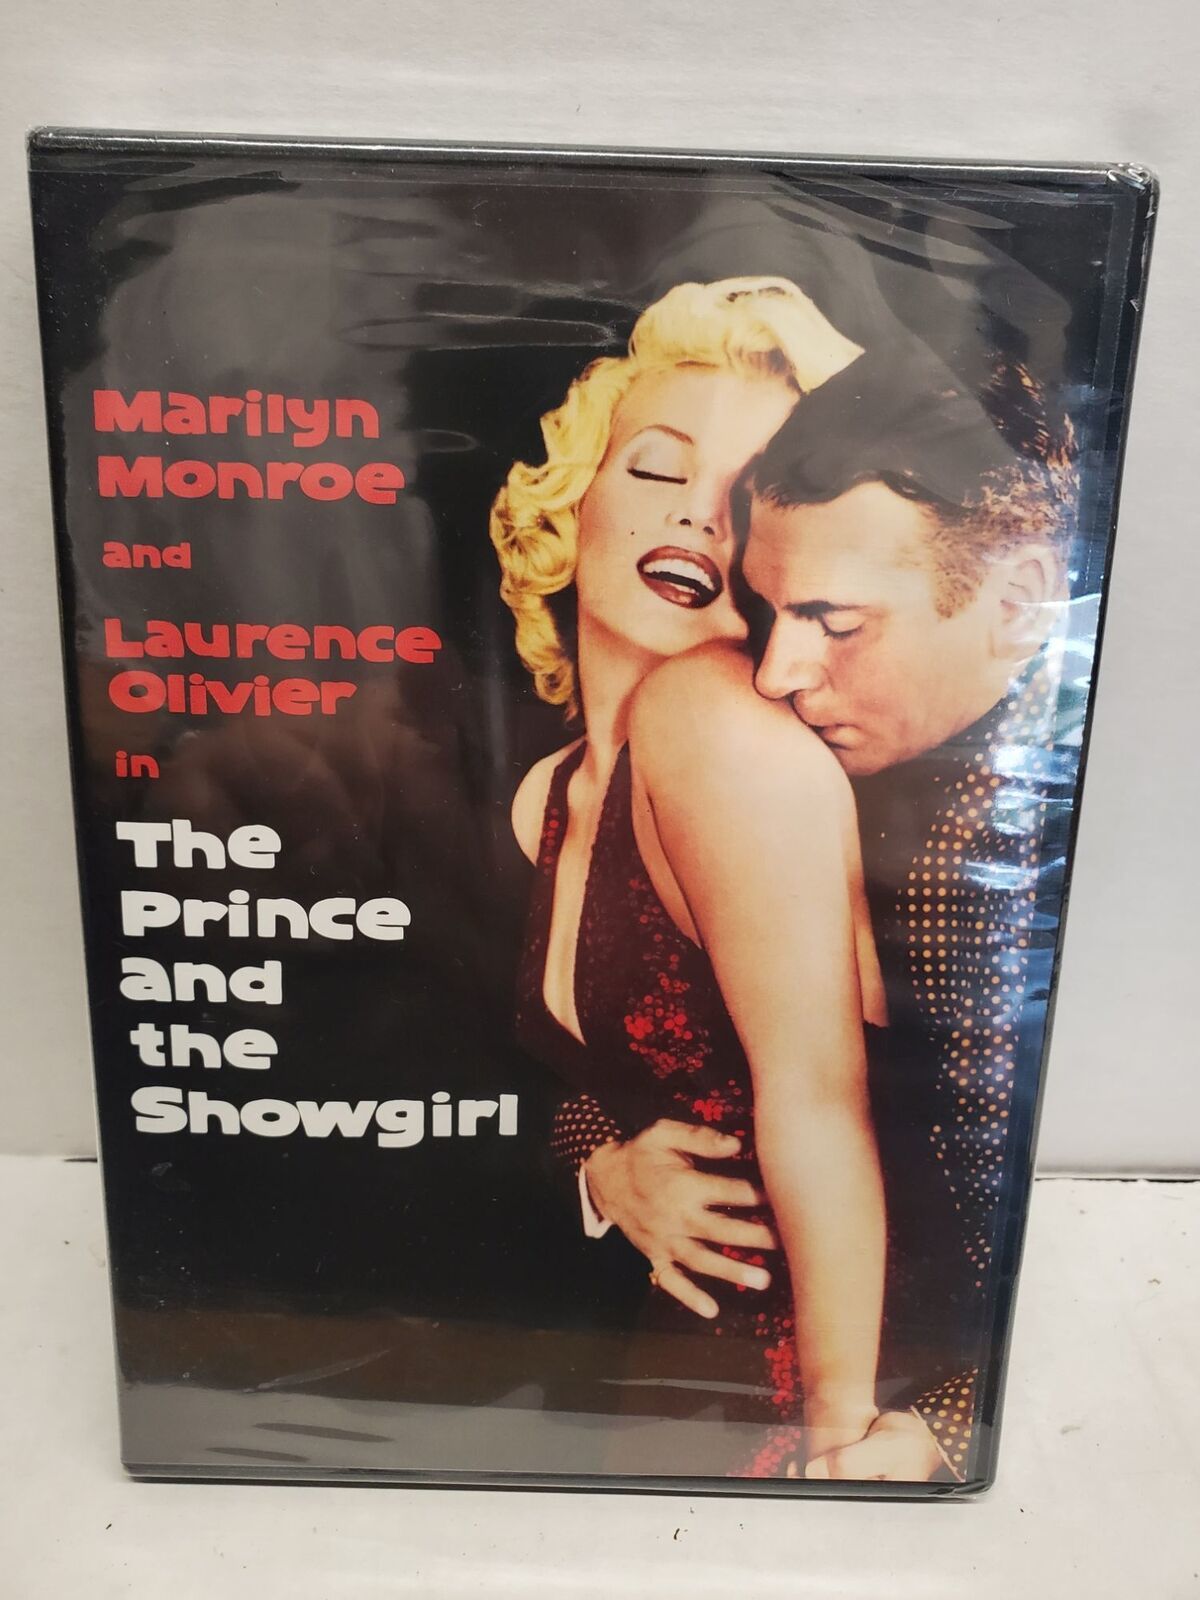 Primary image for The Prince and the Showgirl DVD - New sealed - Marilyn Monroe - Laurence Olivier